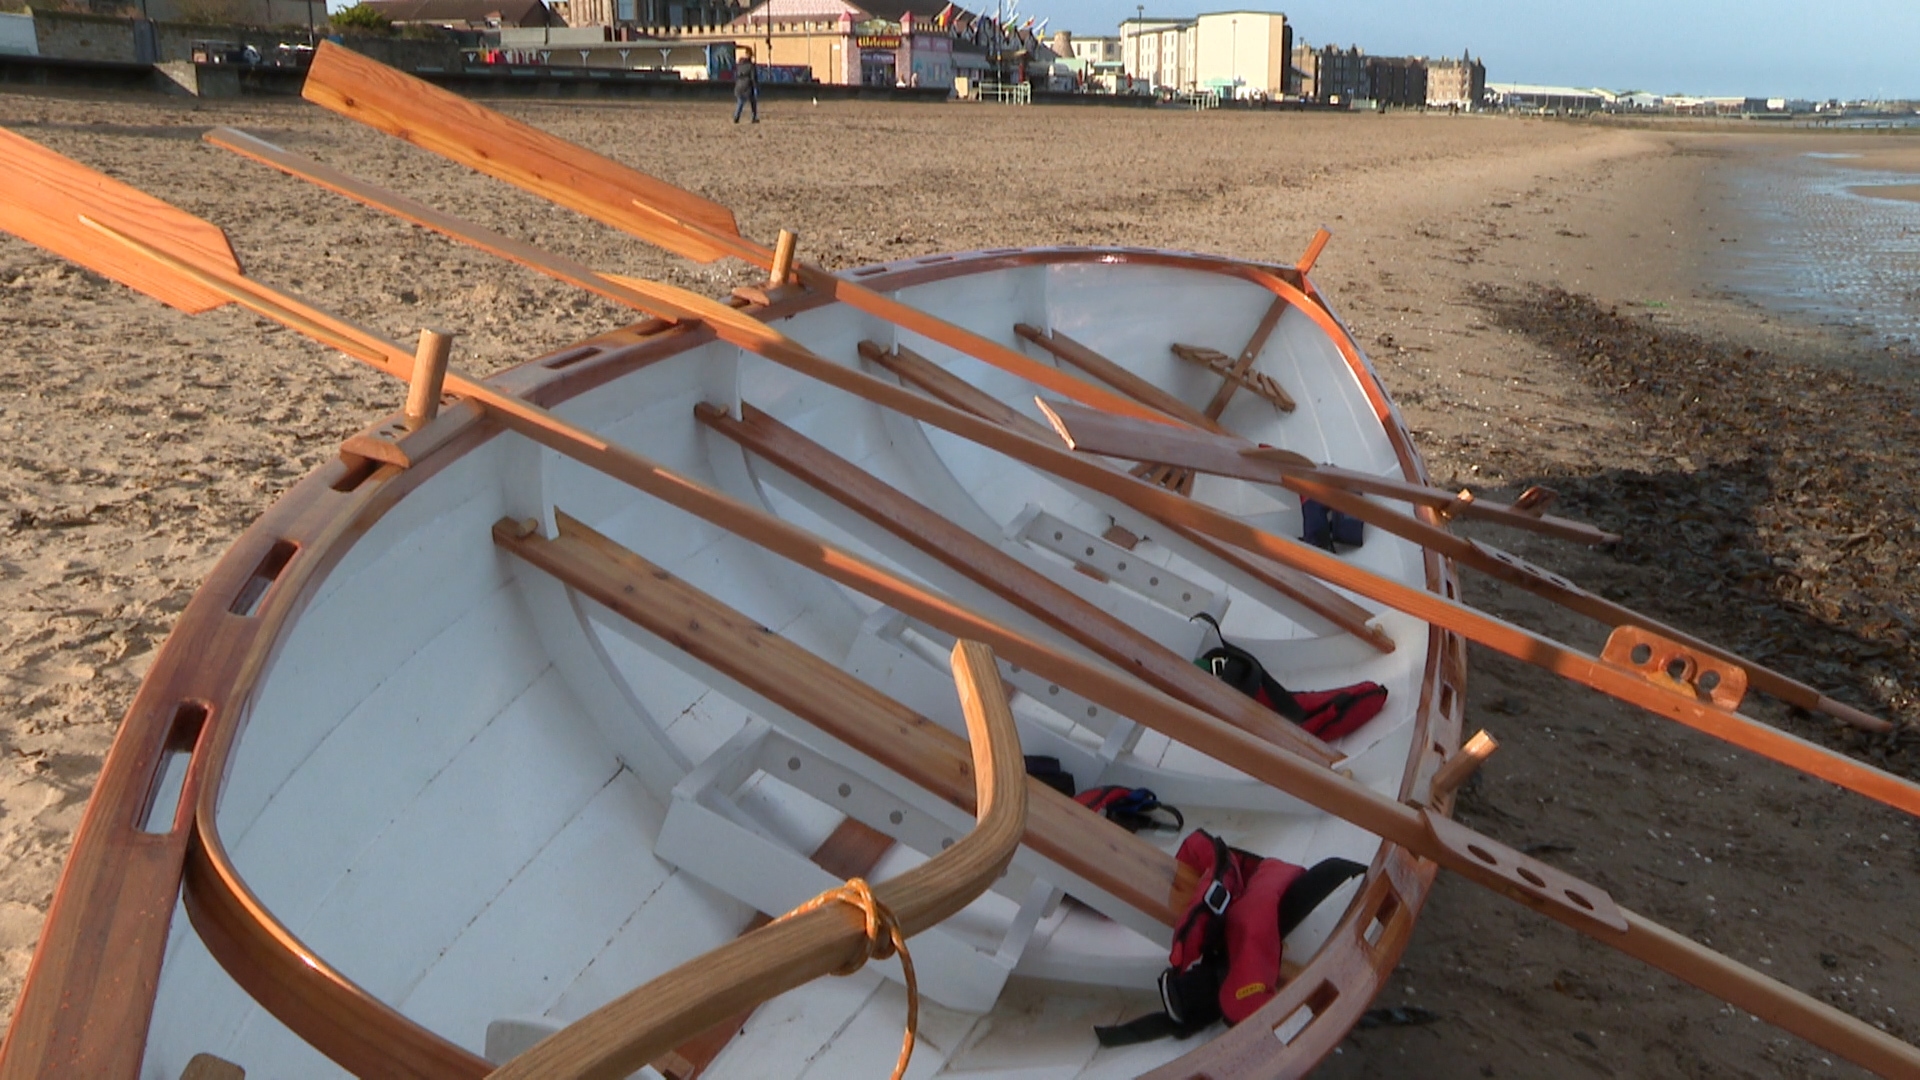 The skiff boat project encouraged pupils to work on literacy and numeracy skills. 